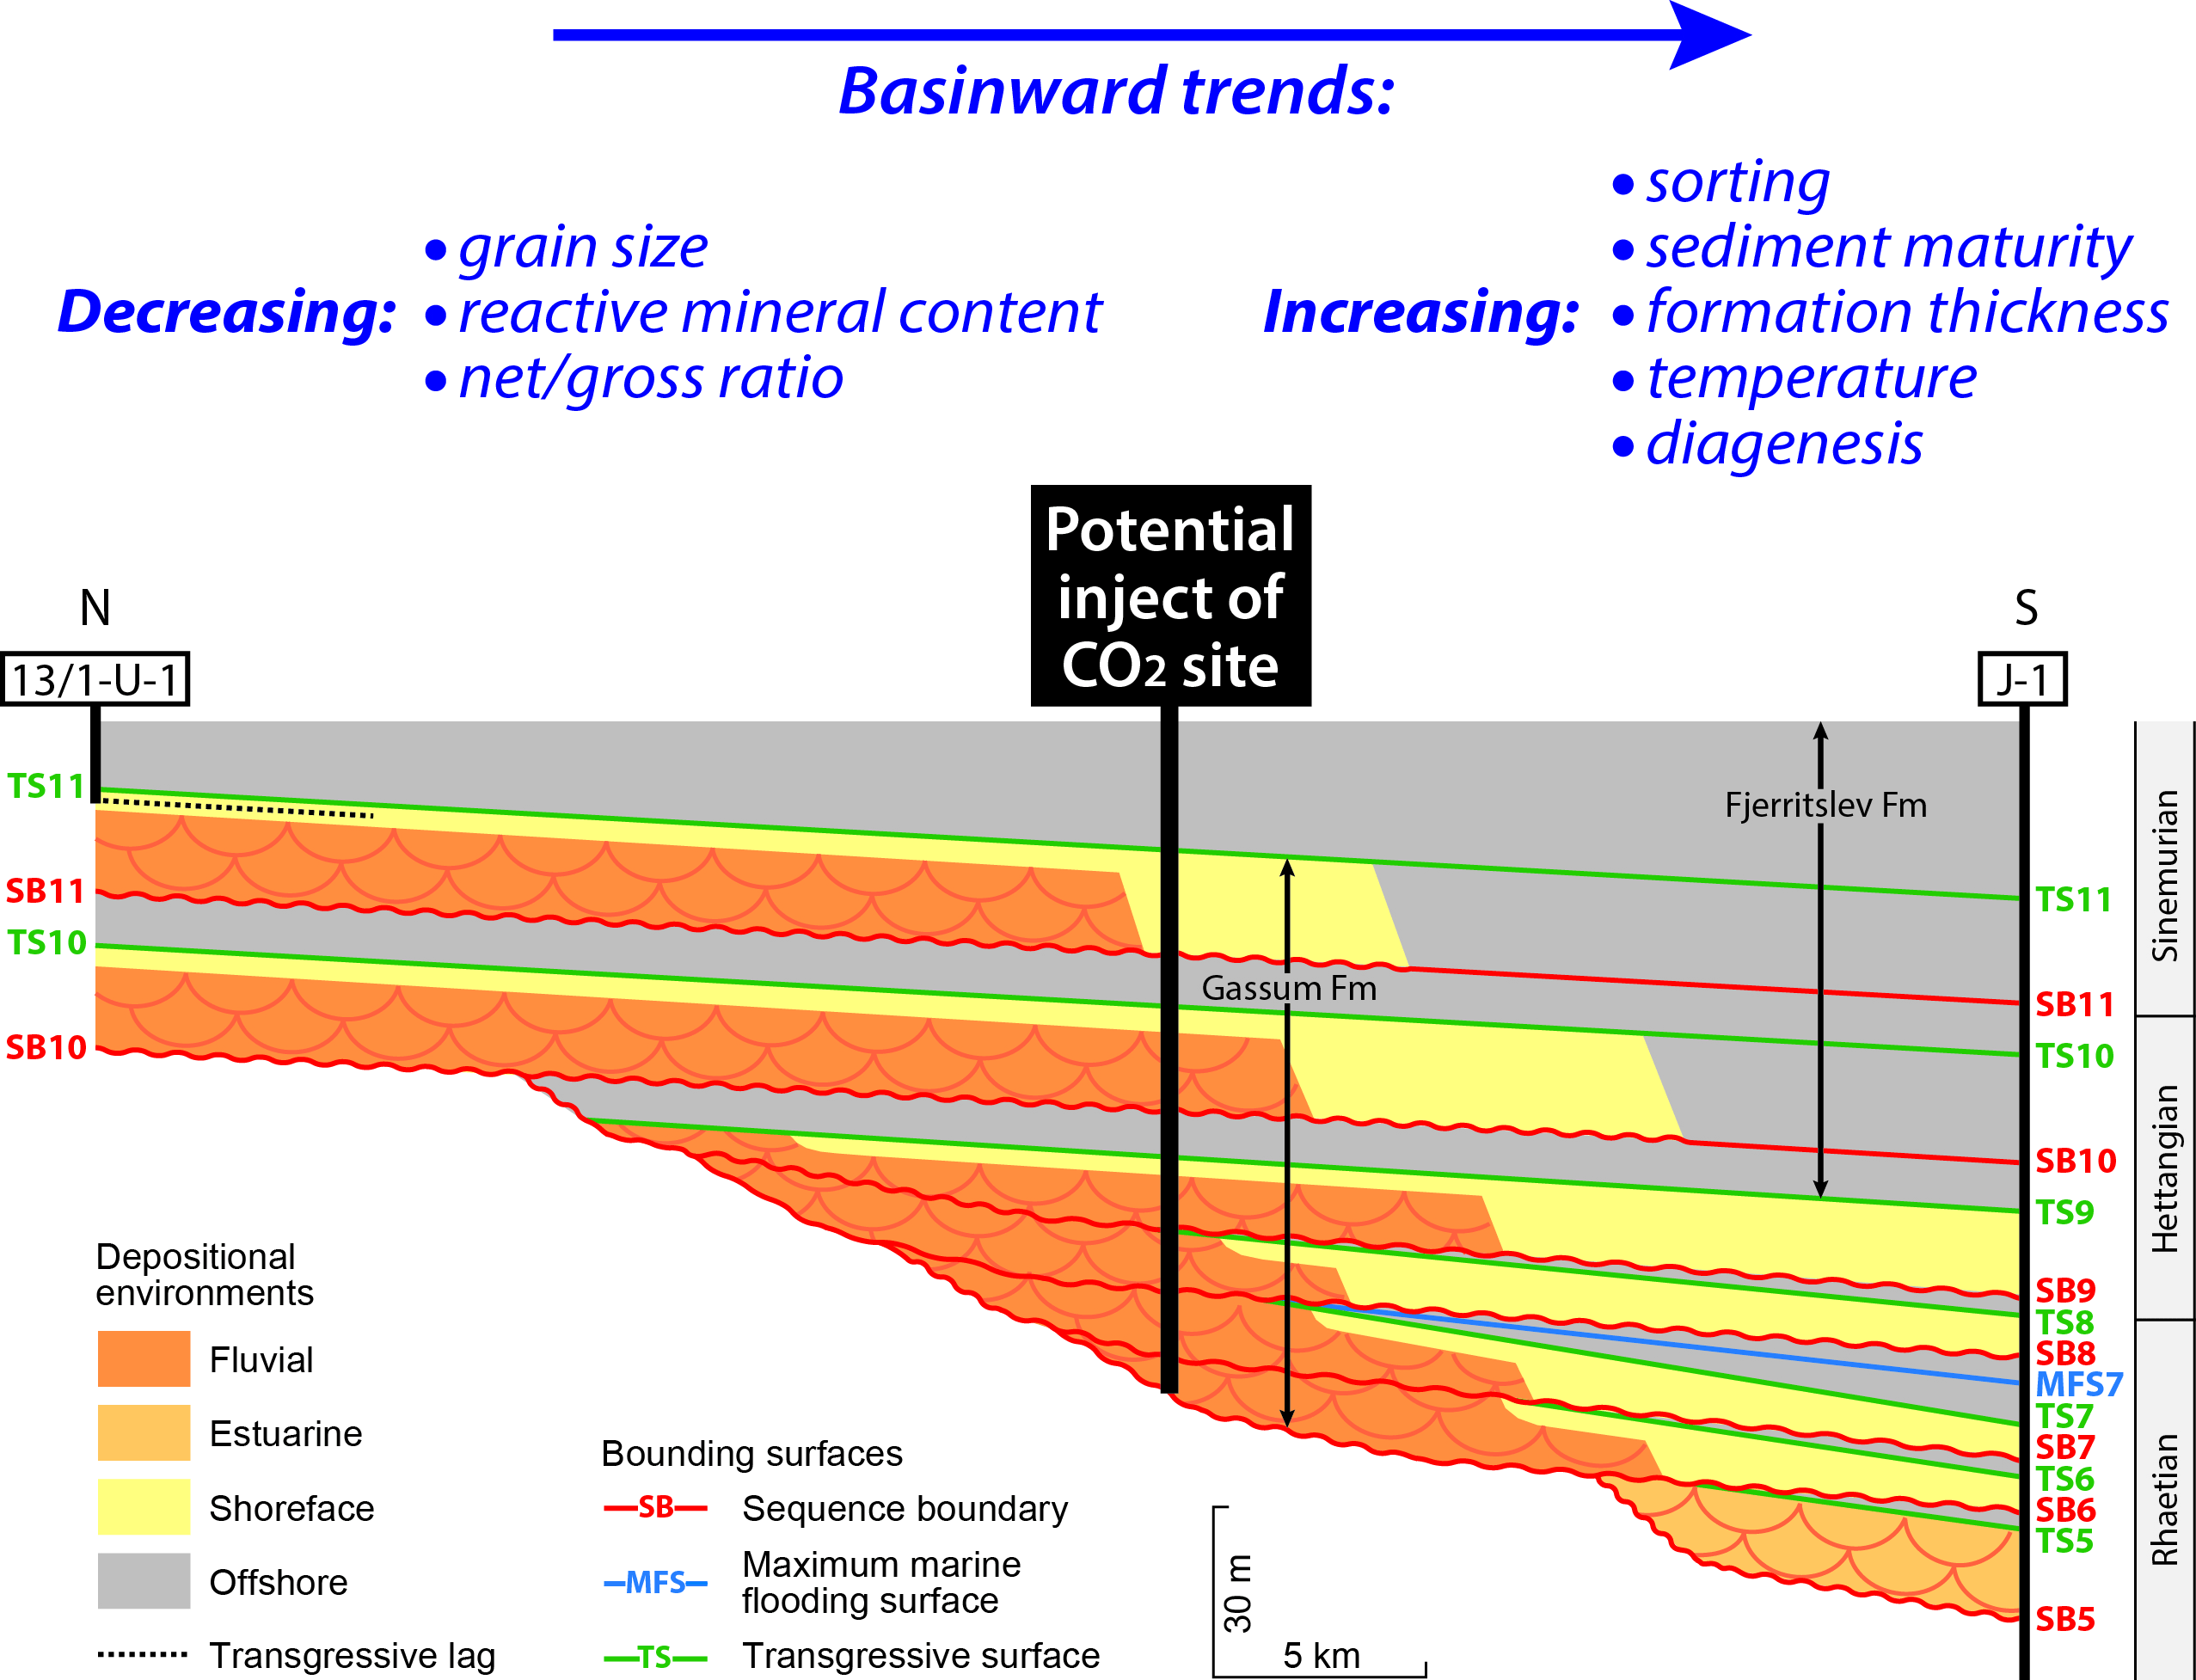 Provenance and Sediment Maturity as Controls on CO2 Mineral Sequestration Potential of the Gassum Formation in the <mark class="highlighted">Skagerrak</mark>